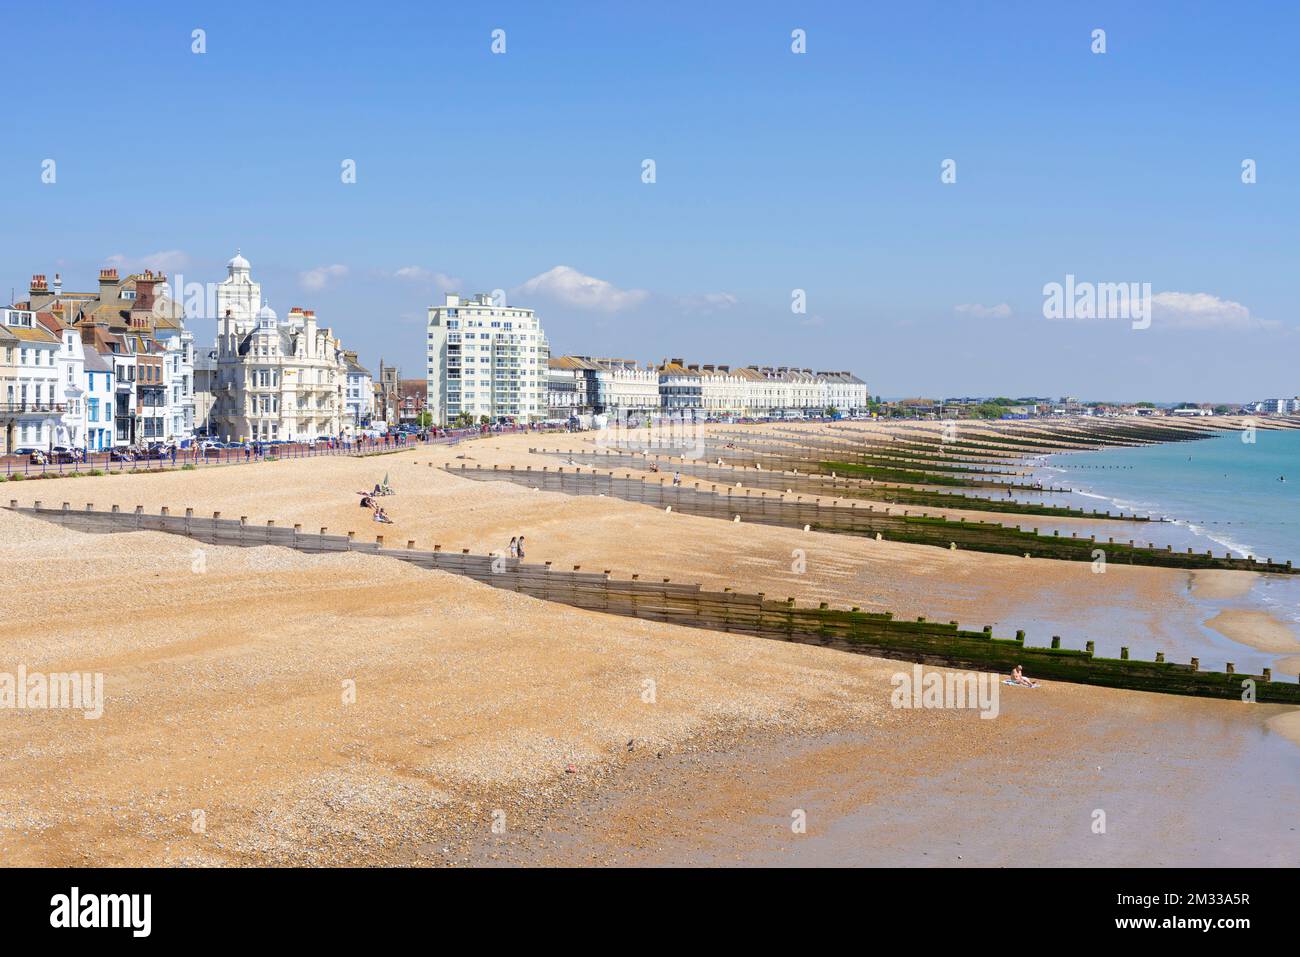 Eastbourne East Sussex Eastbourne shingle beach with wooden groynes and promenade with large hotels Eastbourne East Sussex England UK GB Europe Stock Photo